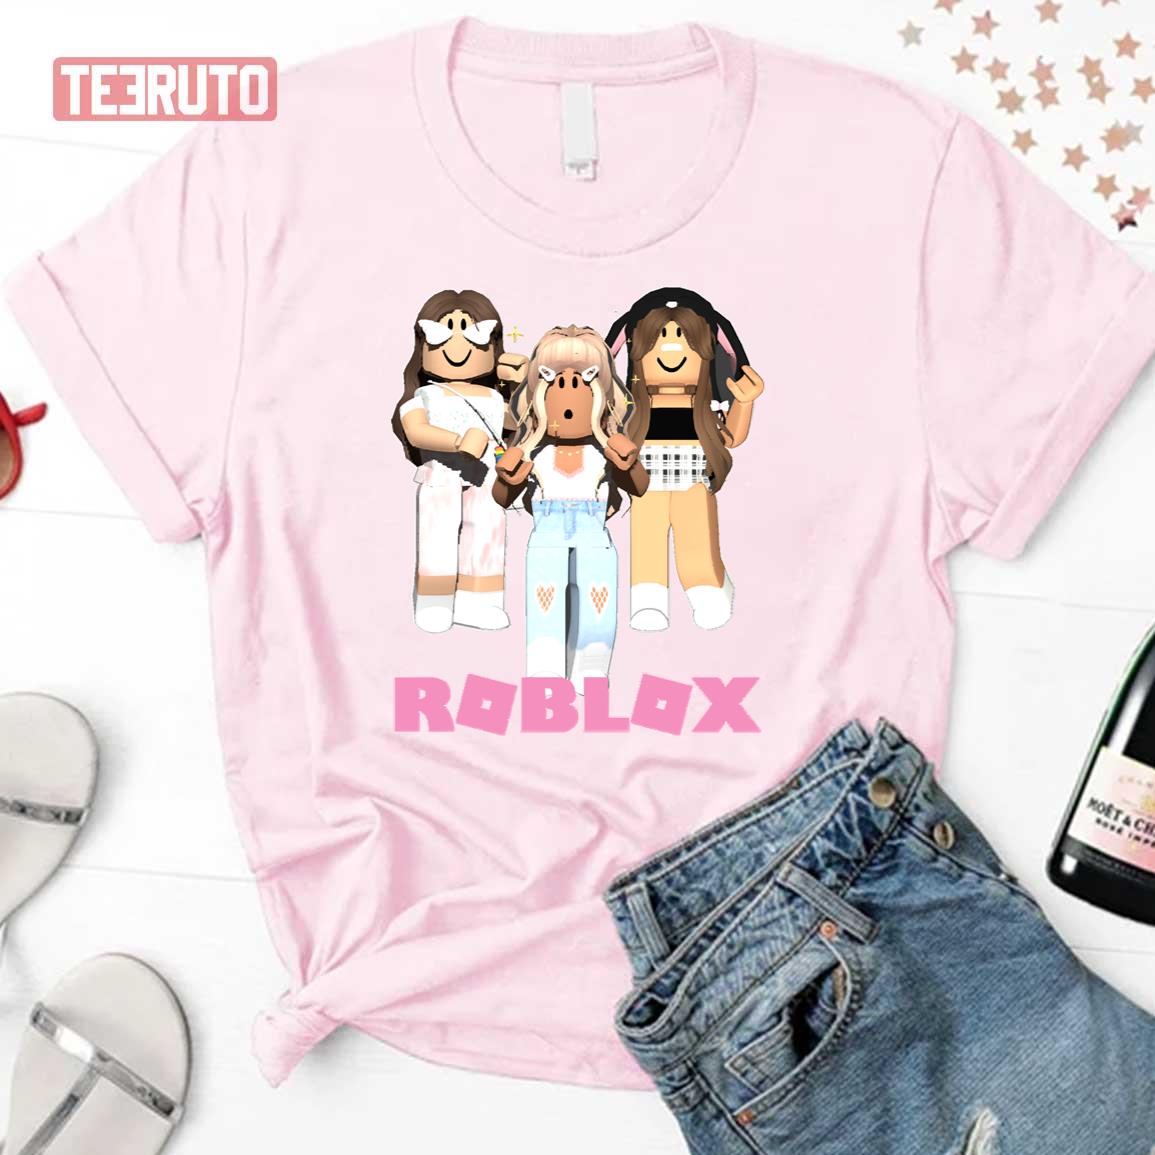 Buy Roblox Clothes For Girls online